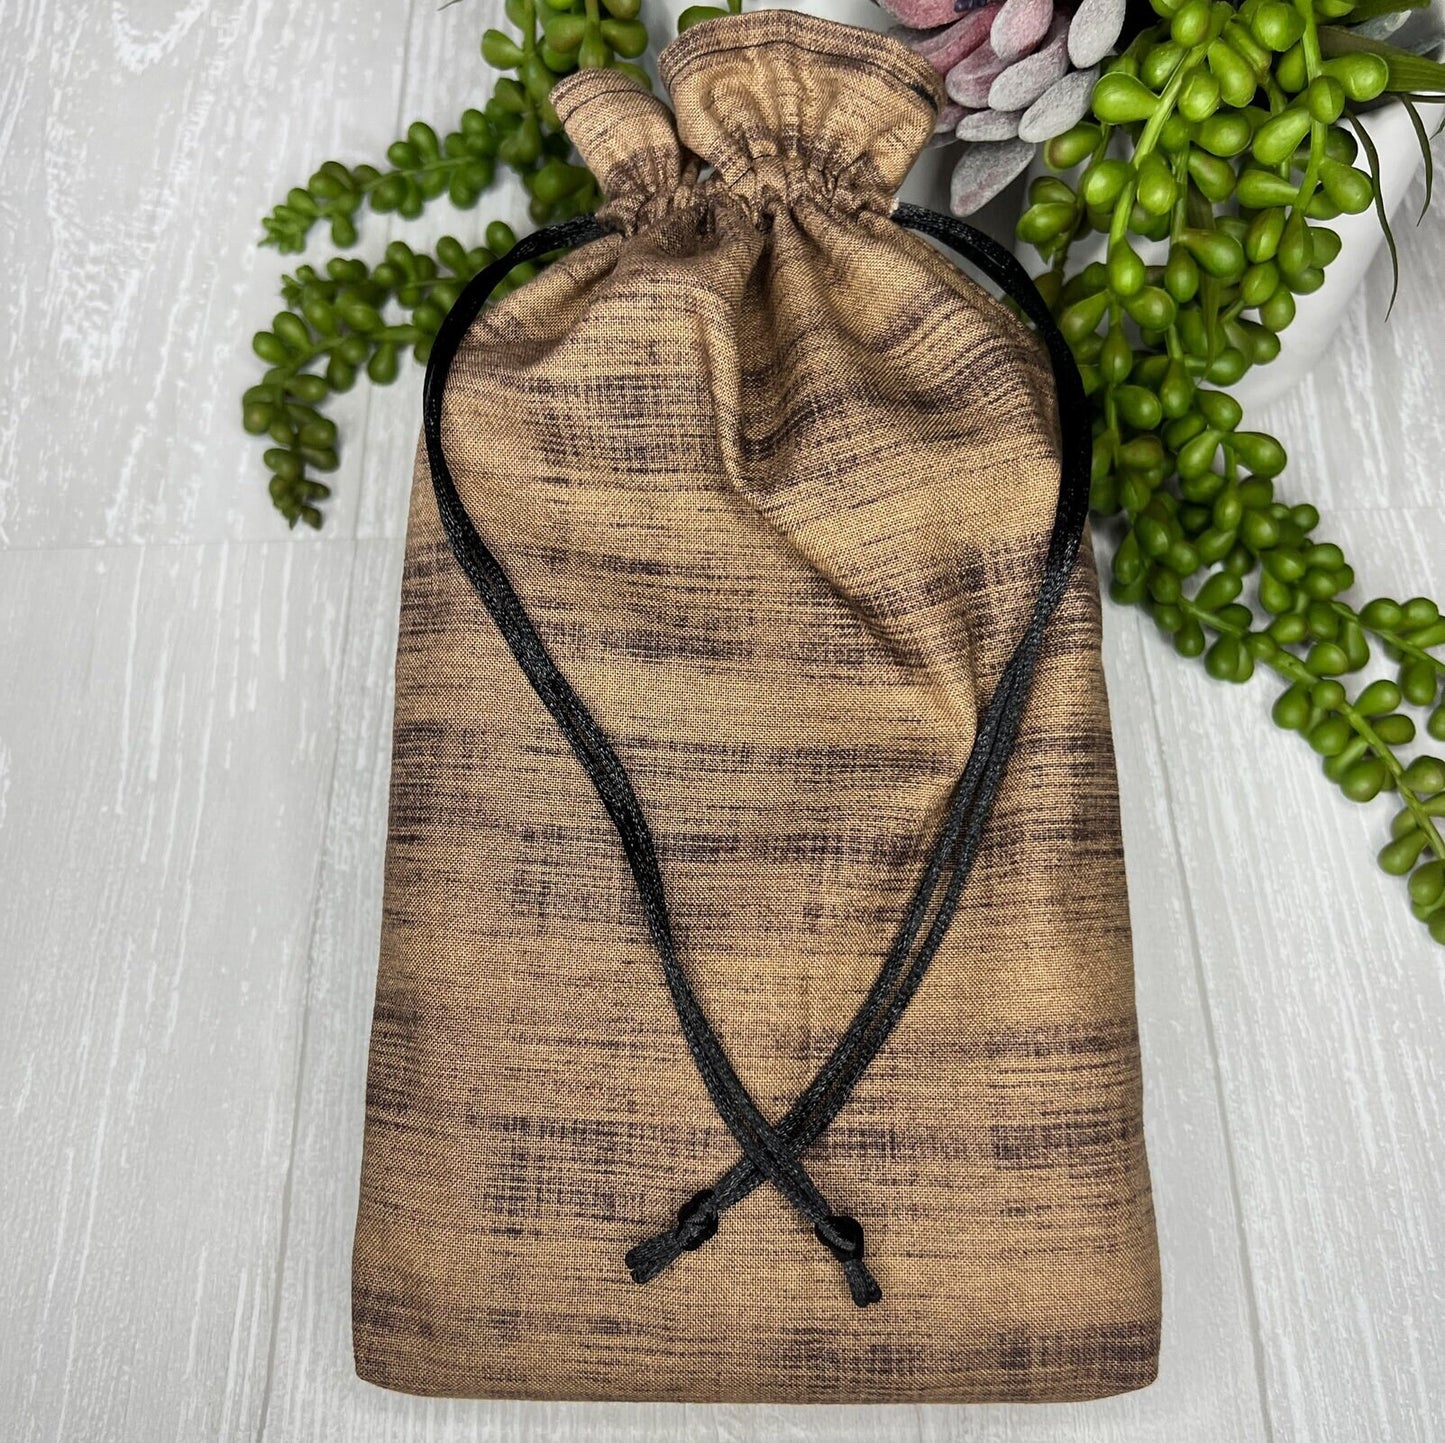 Large Tarot Deck Bag, Brown and Black Lined Drawstring Pouch, Deck Storage Holder, Pagan Witchcraft Wiccan Divination Tools Gifts & Supplies